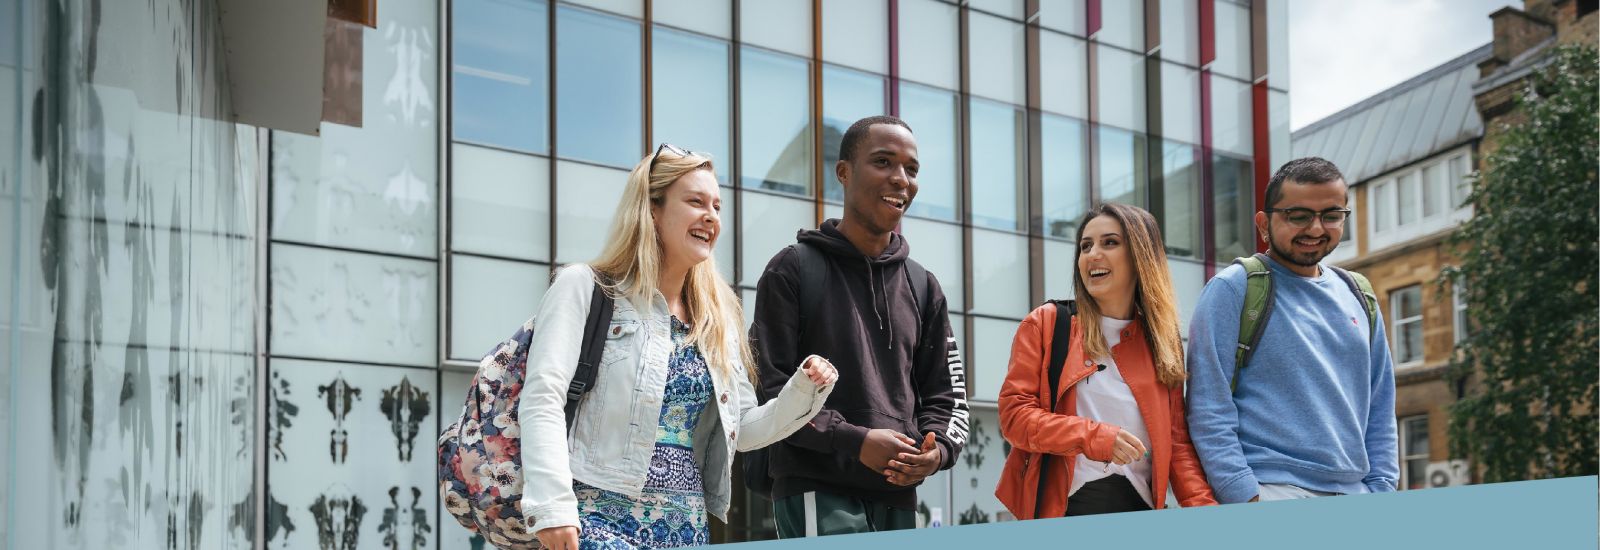 Four students talking while walking in front of the glass wall of an Oxford building 